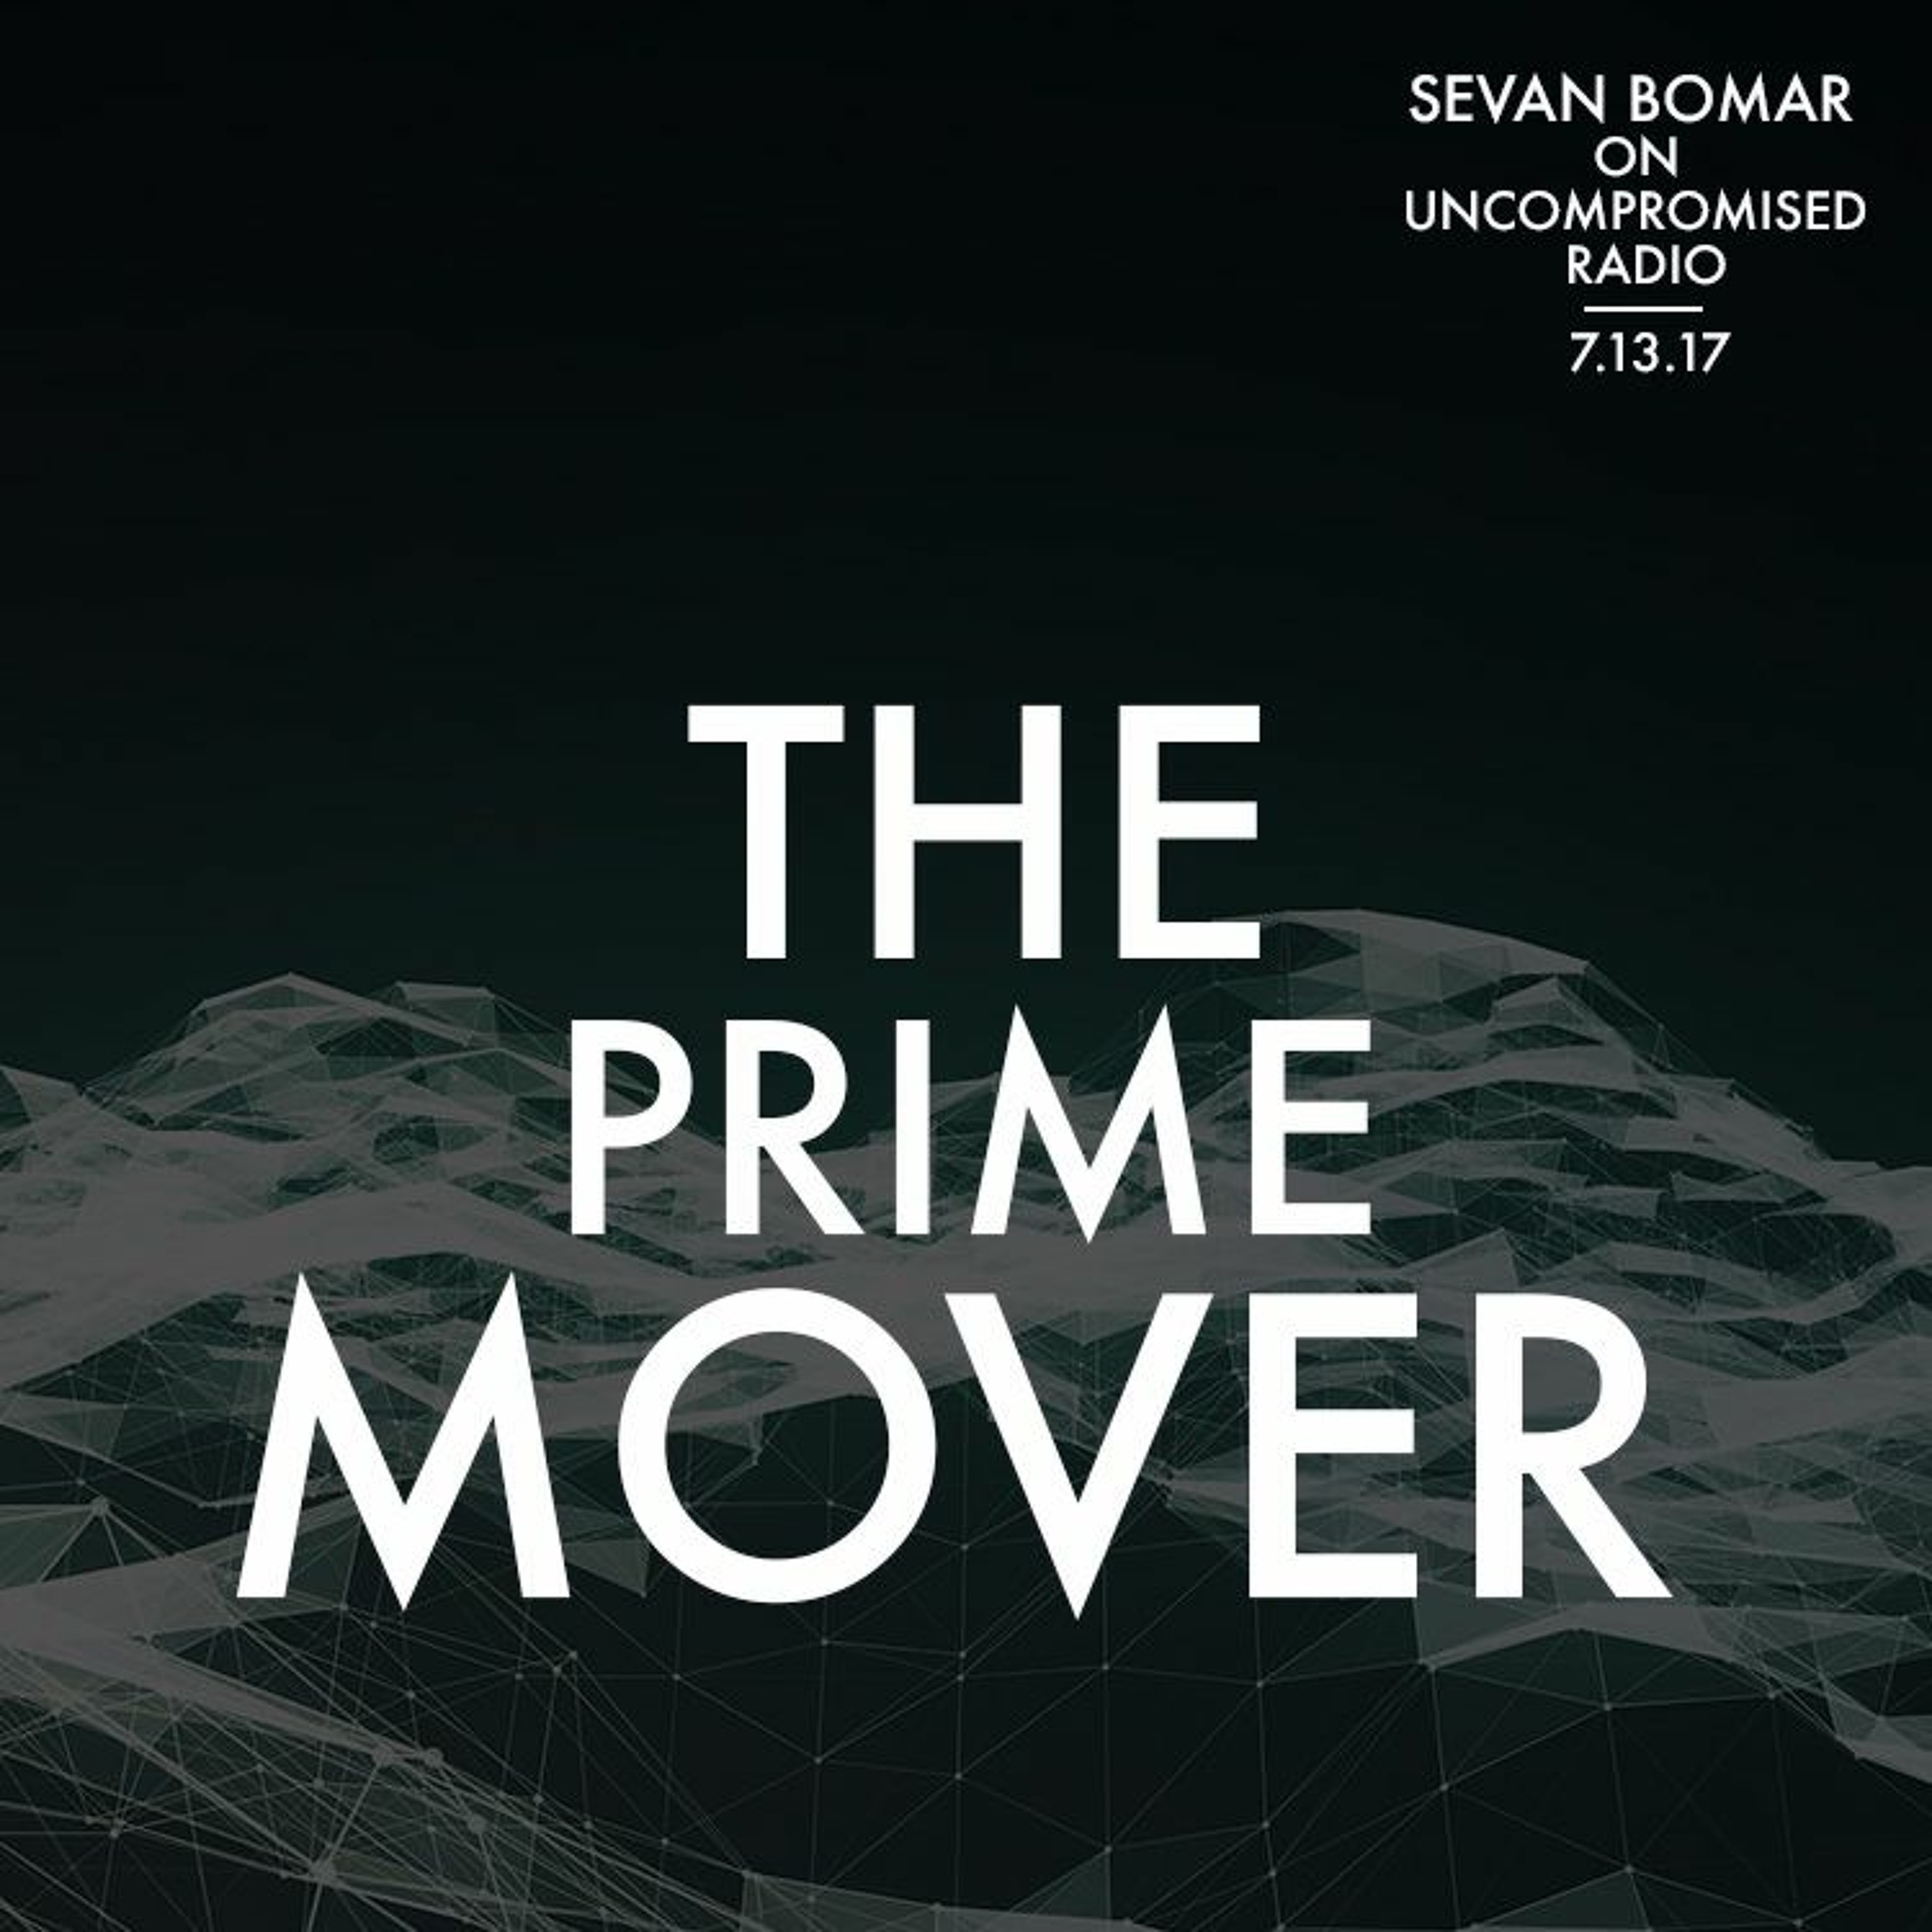 THE PRIME MOVER - SEVAN ON UNCOMPROMISED RADIO - 7-13-17